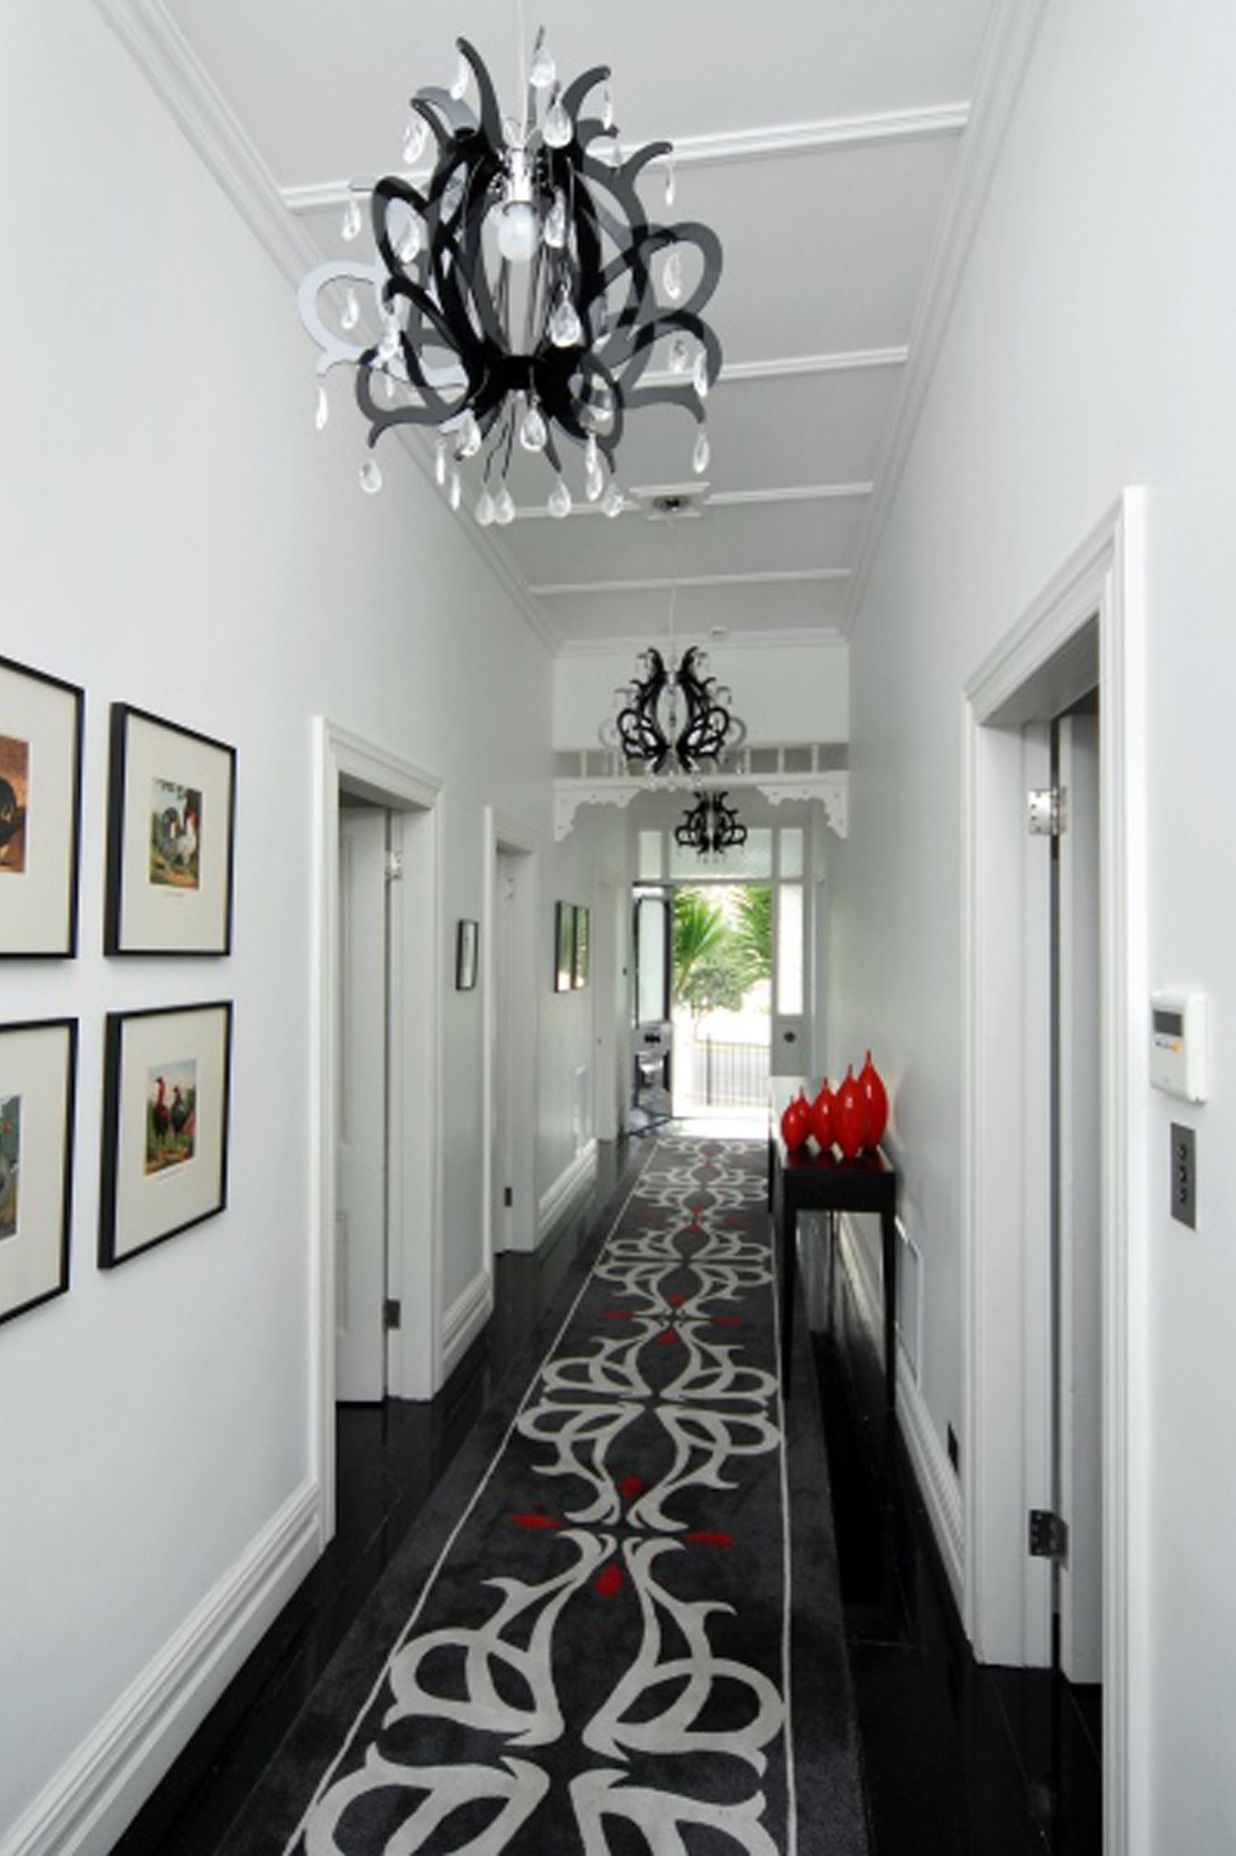 A custom designed floor run to connect with the contempory chandelier pendant lights.